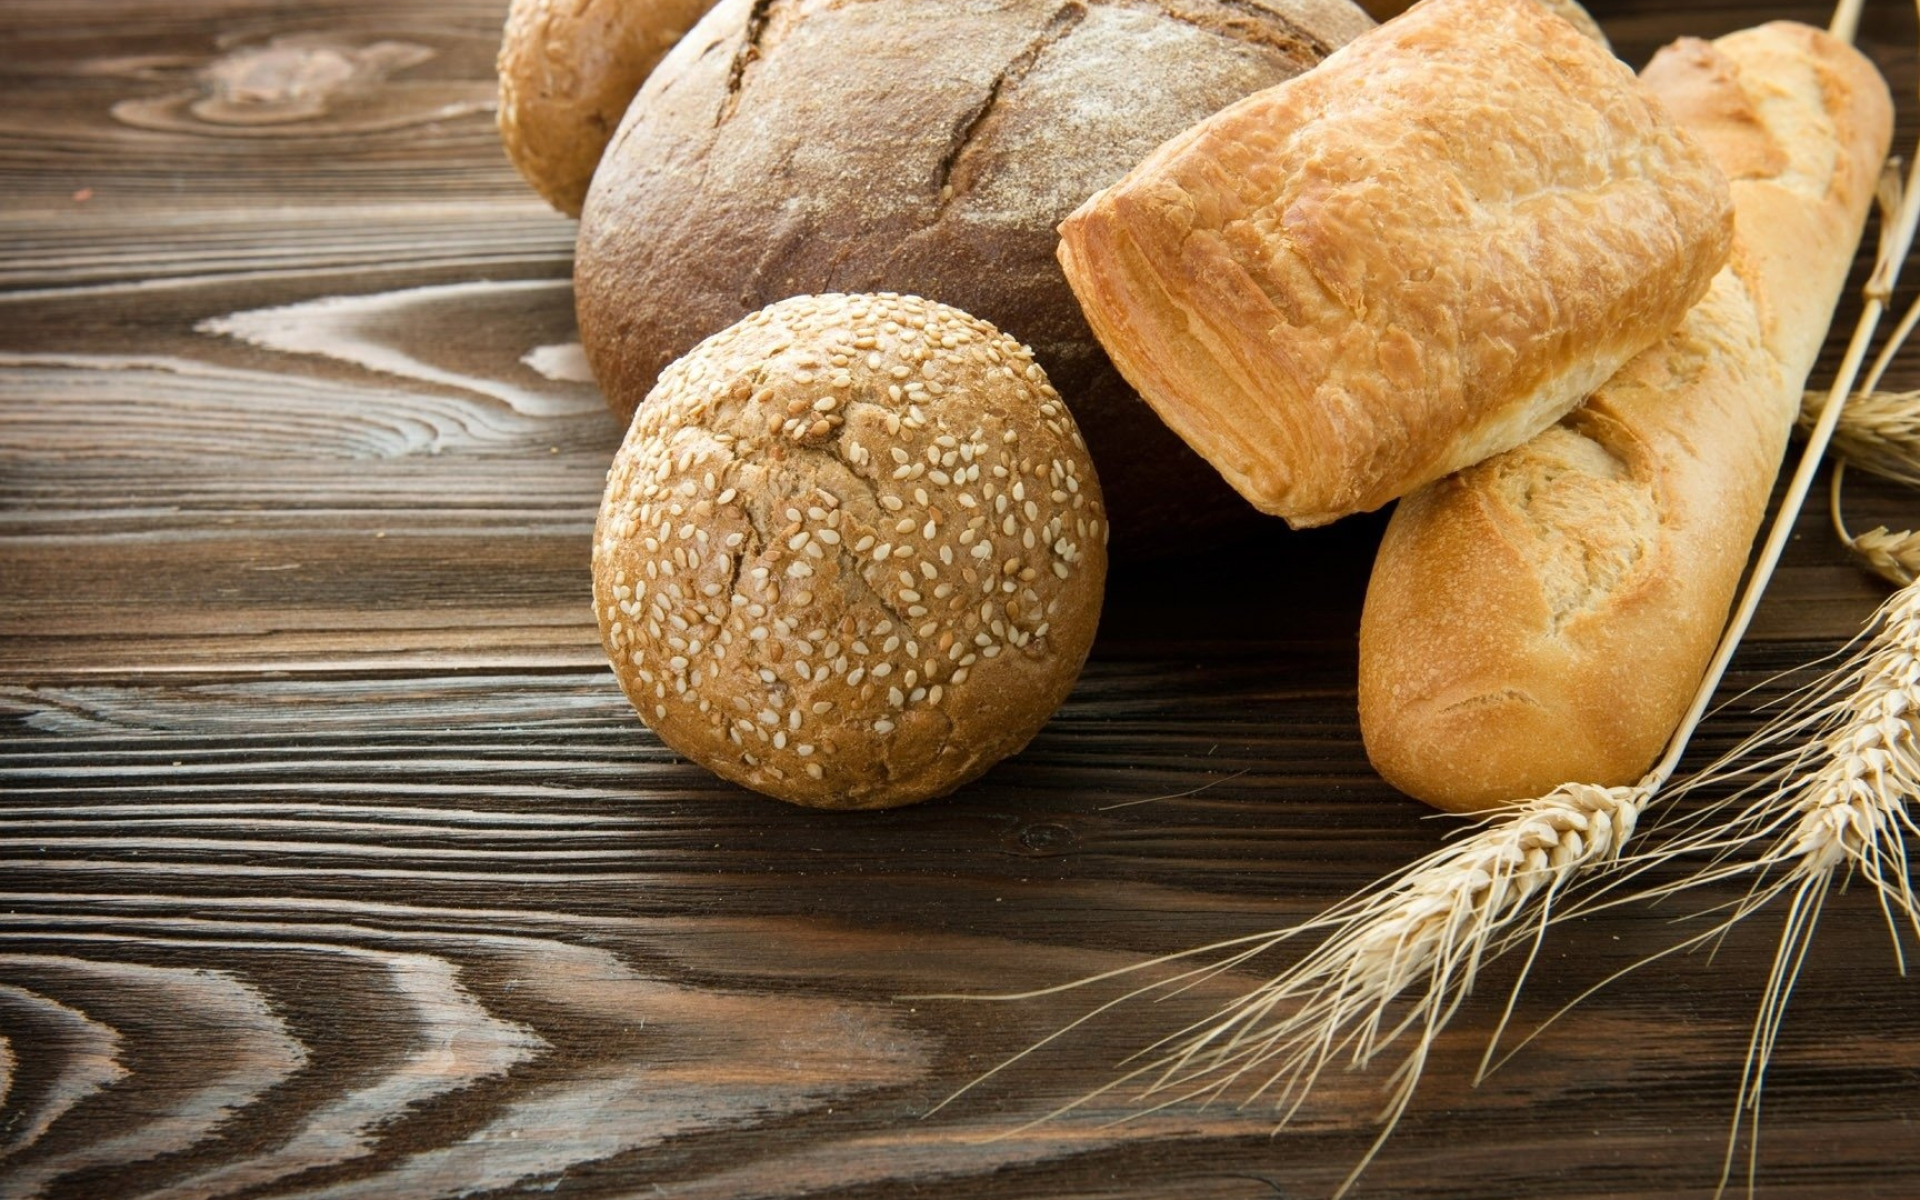 Freshly baked loaf, Warm crusty bread, Delicious aroma, Sliced perfection, 1920x1200 HD Desktop